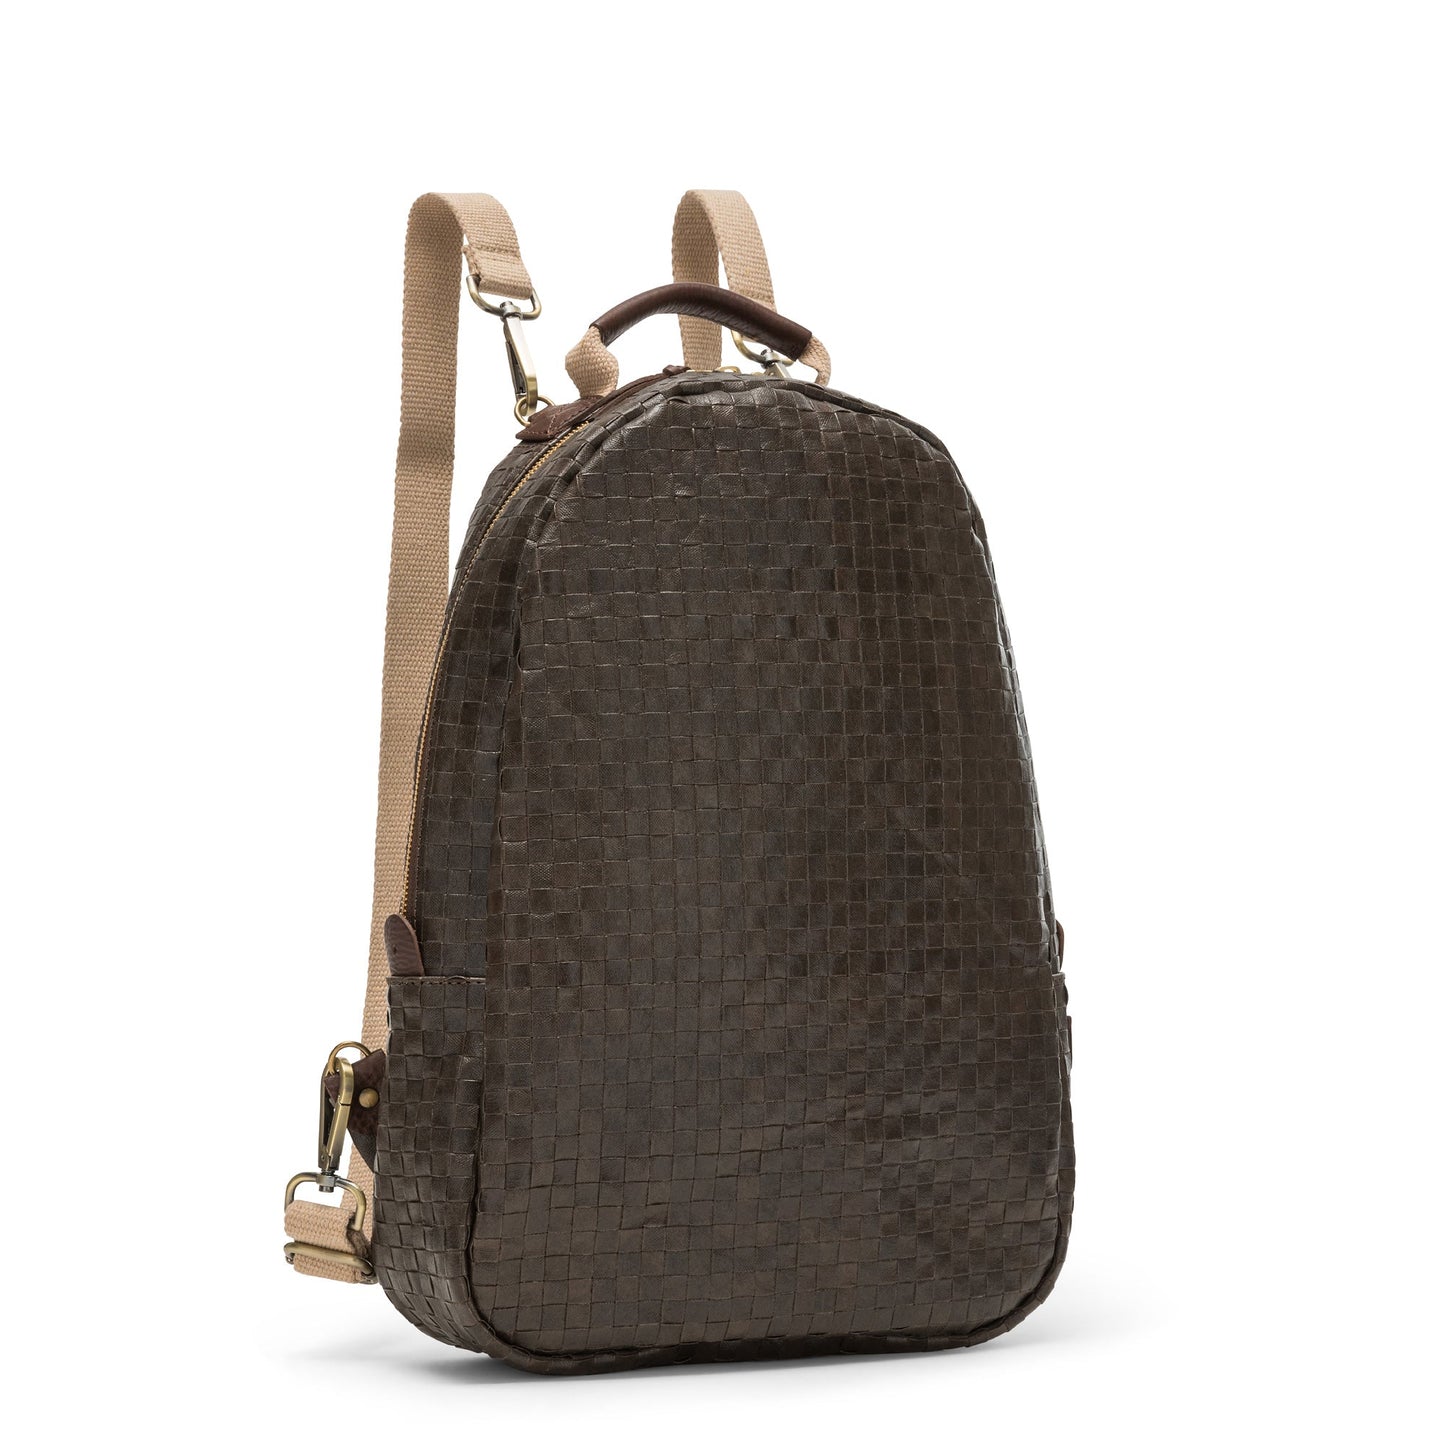 A woven washable paper backpack is shown from a 3/4 angle. It is oval in shape and features two adjustable canvas straps and a top handle. It is chocolate brown in colour.